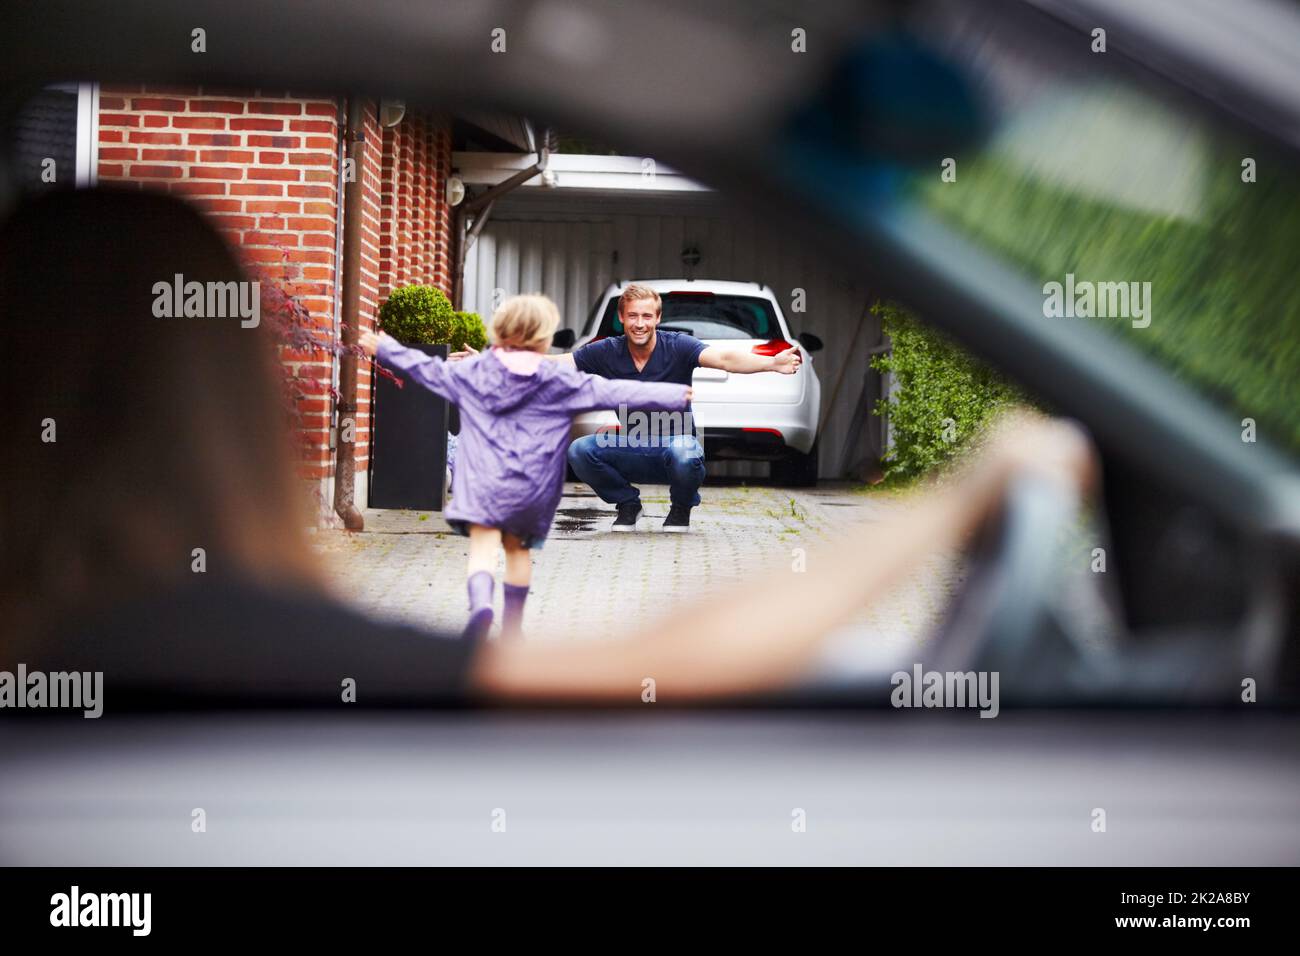 Shes happy to be home. Shot of a little girl running towards her father. Stock Photo